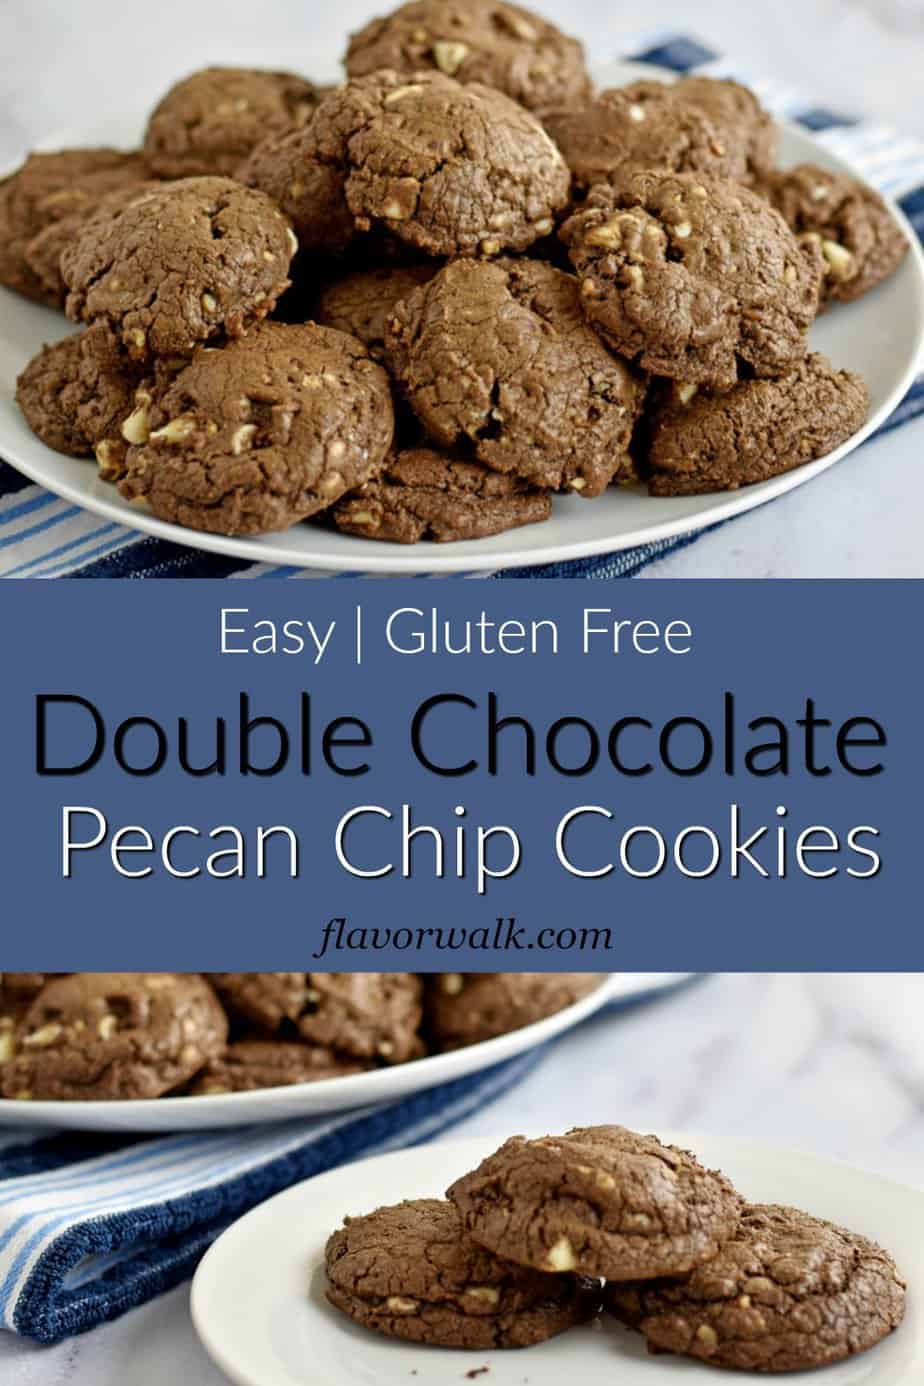 Top image is a white plate filled with gluten free chocolate chip pecan cookies, middle image is a blue text overlay, bottom image is 3 chocolate chip pecan cookies on a small white plate with additional cookies in the background.